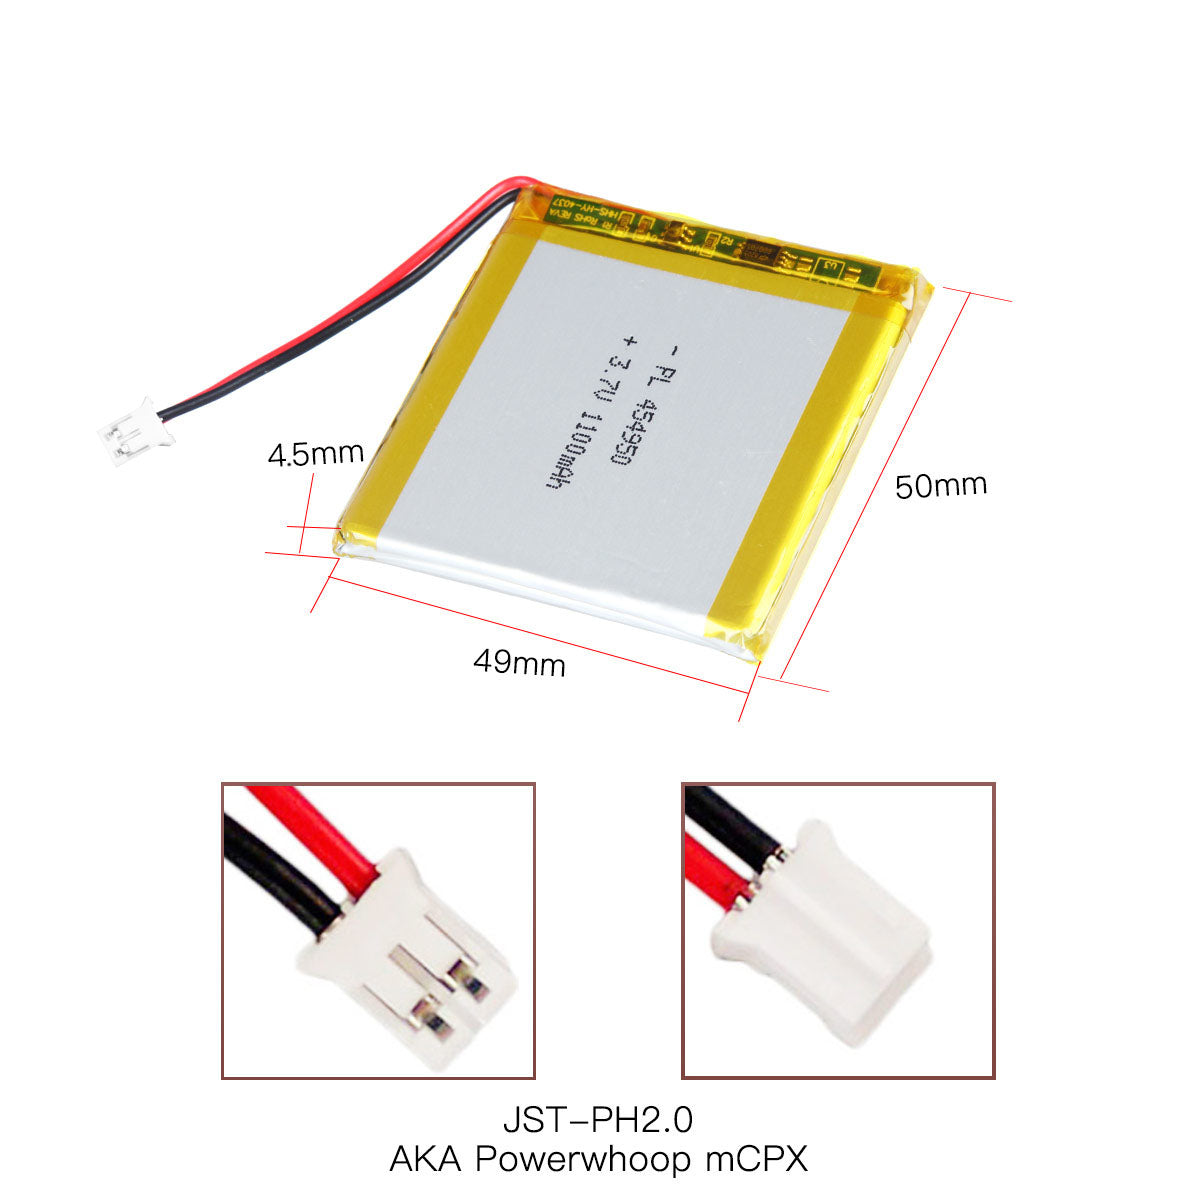 YDL 3.7V 1100mAh 454950 Rechargeable Lithium Polymer Battery Length 52mm